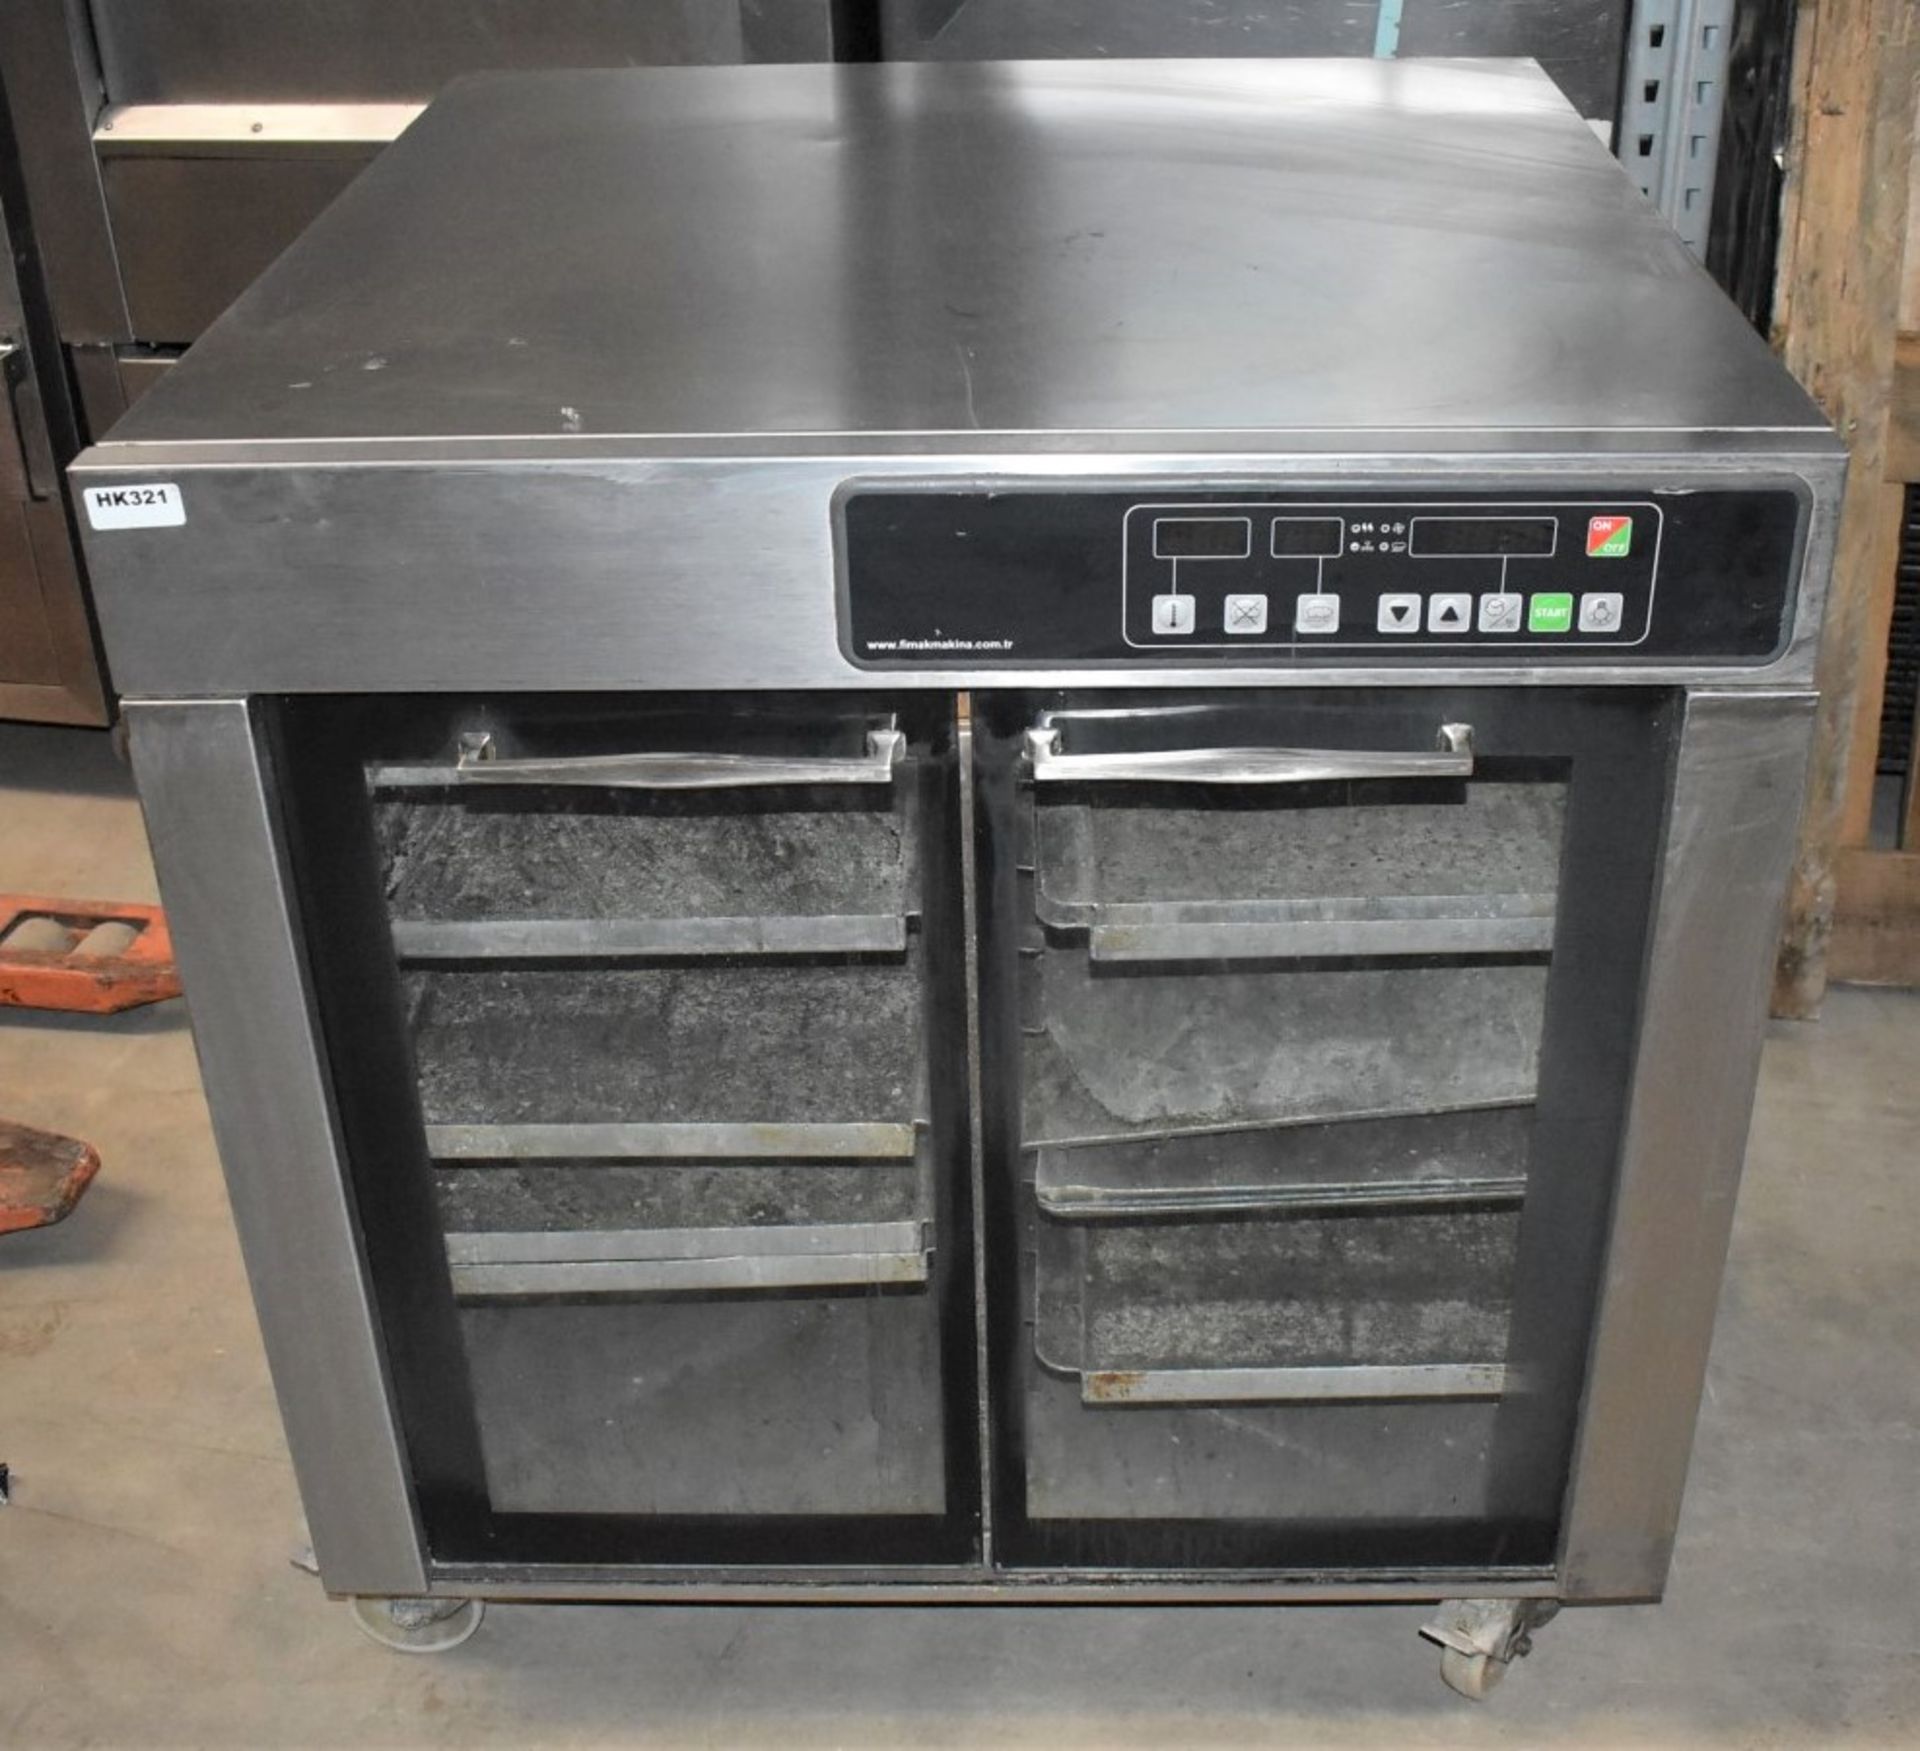 1 x FiMAK Windrose FW10 Convection Baking Oven - 240v - Size: 95 x 95 x 95 cms - Ref : HK321 WH2 B5G - Image 5 of 8